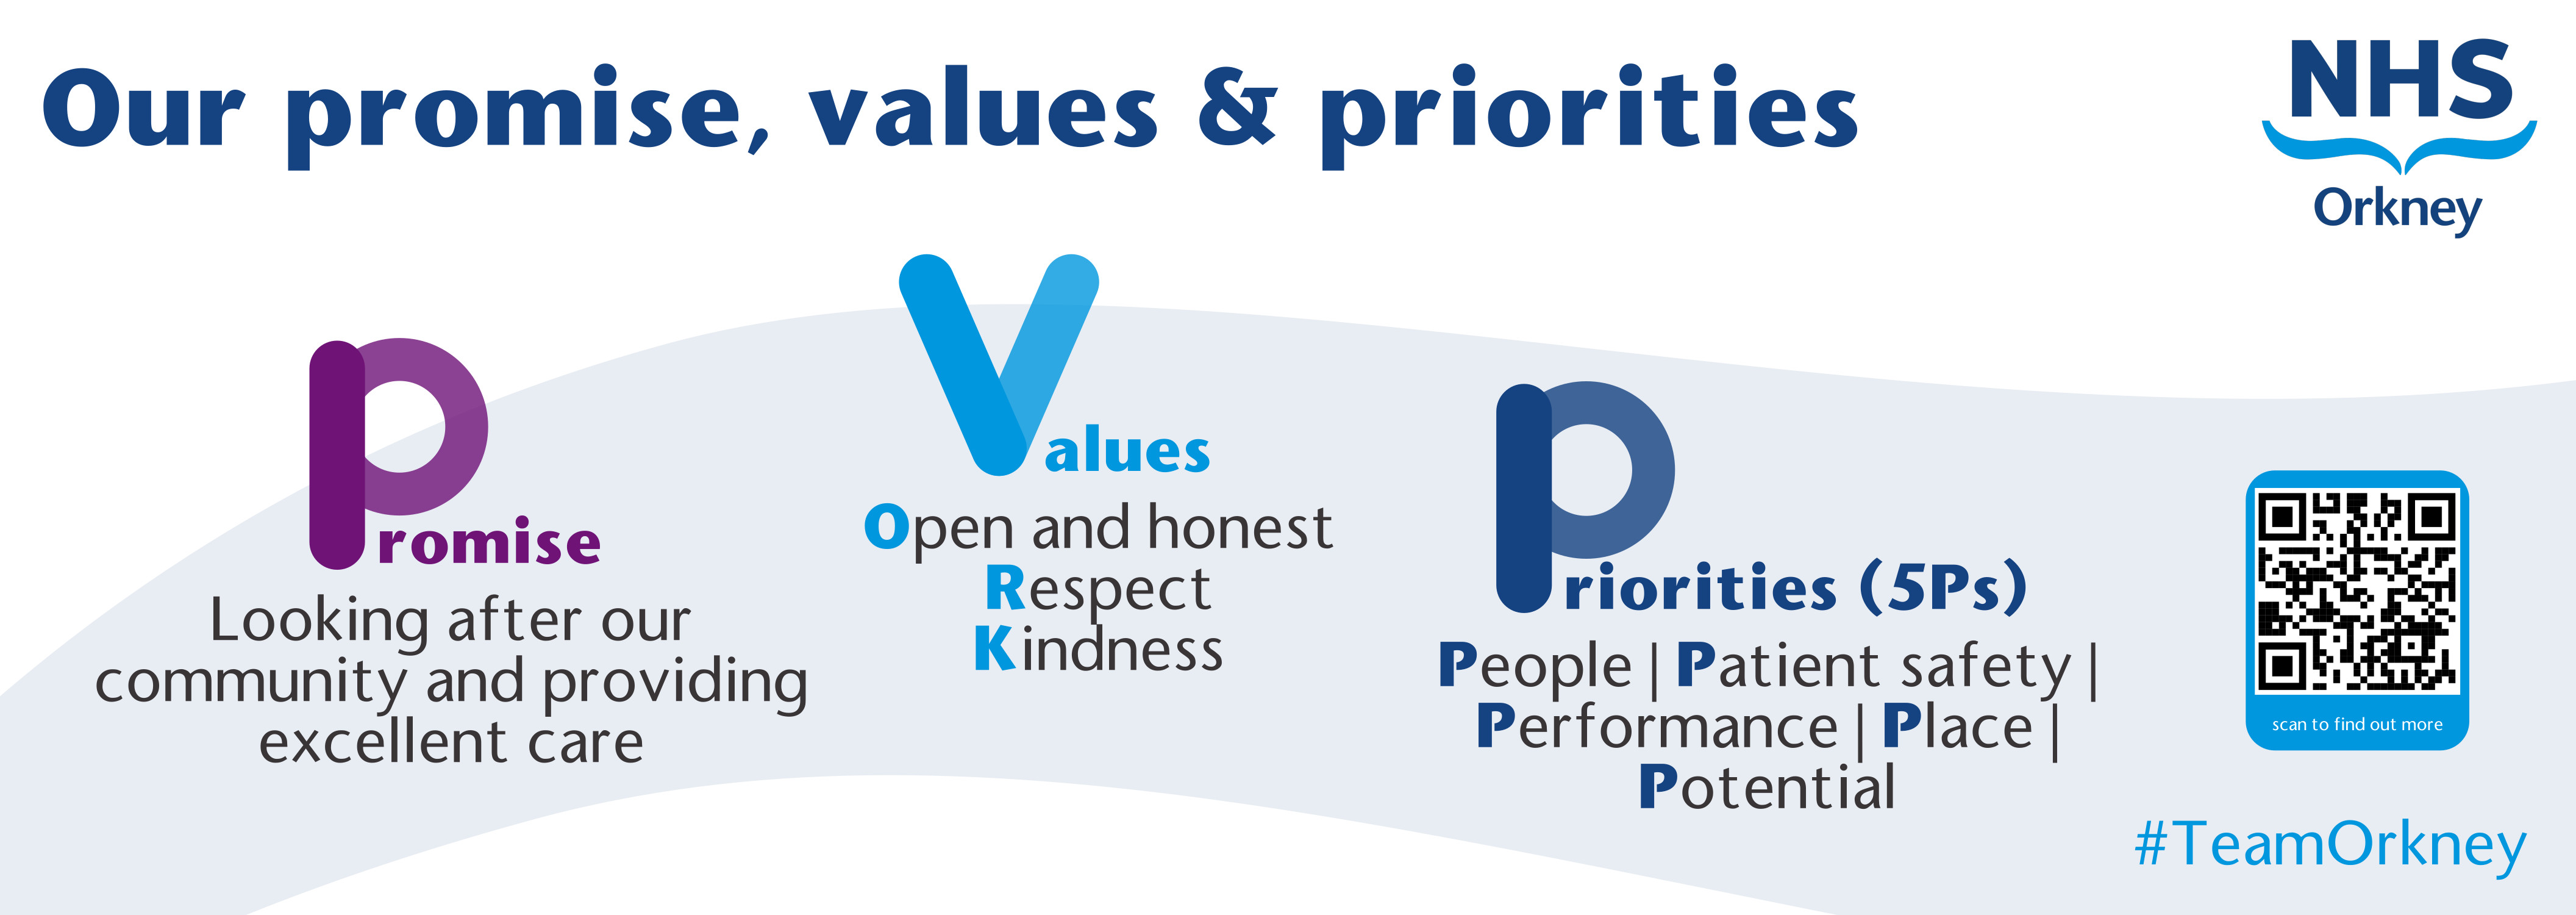 NHSO - Values Visions 5ps